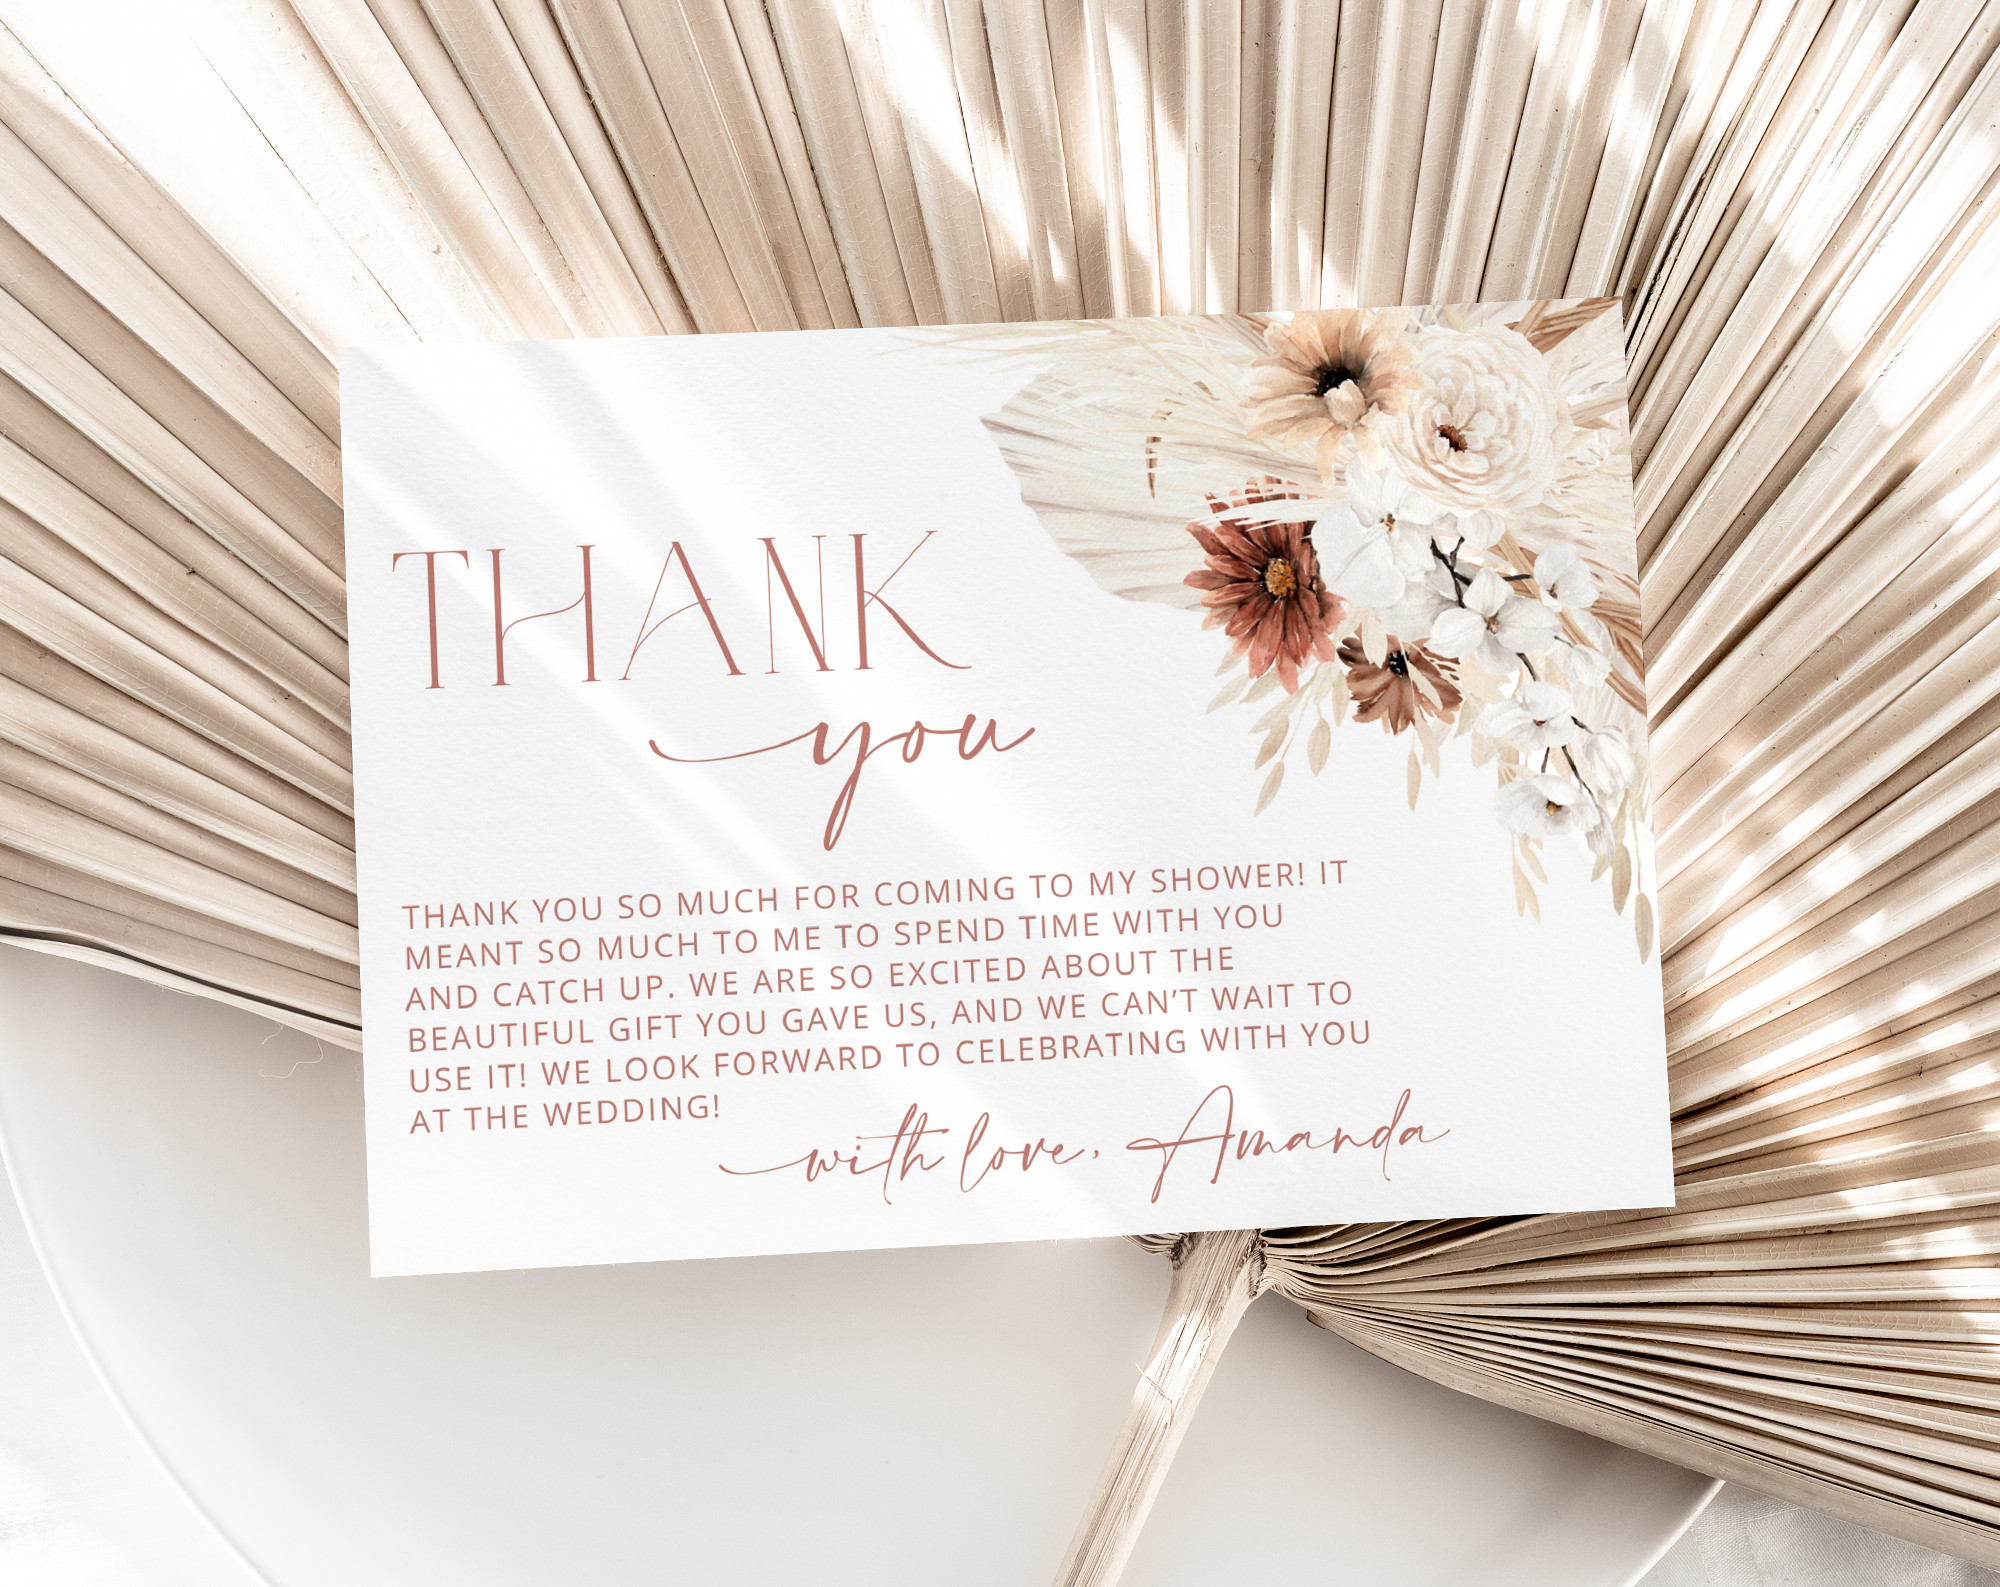 What to Write in Any Bridal or Wedding Shower Card (60+ Ideas)